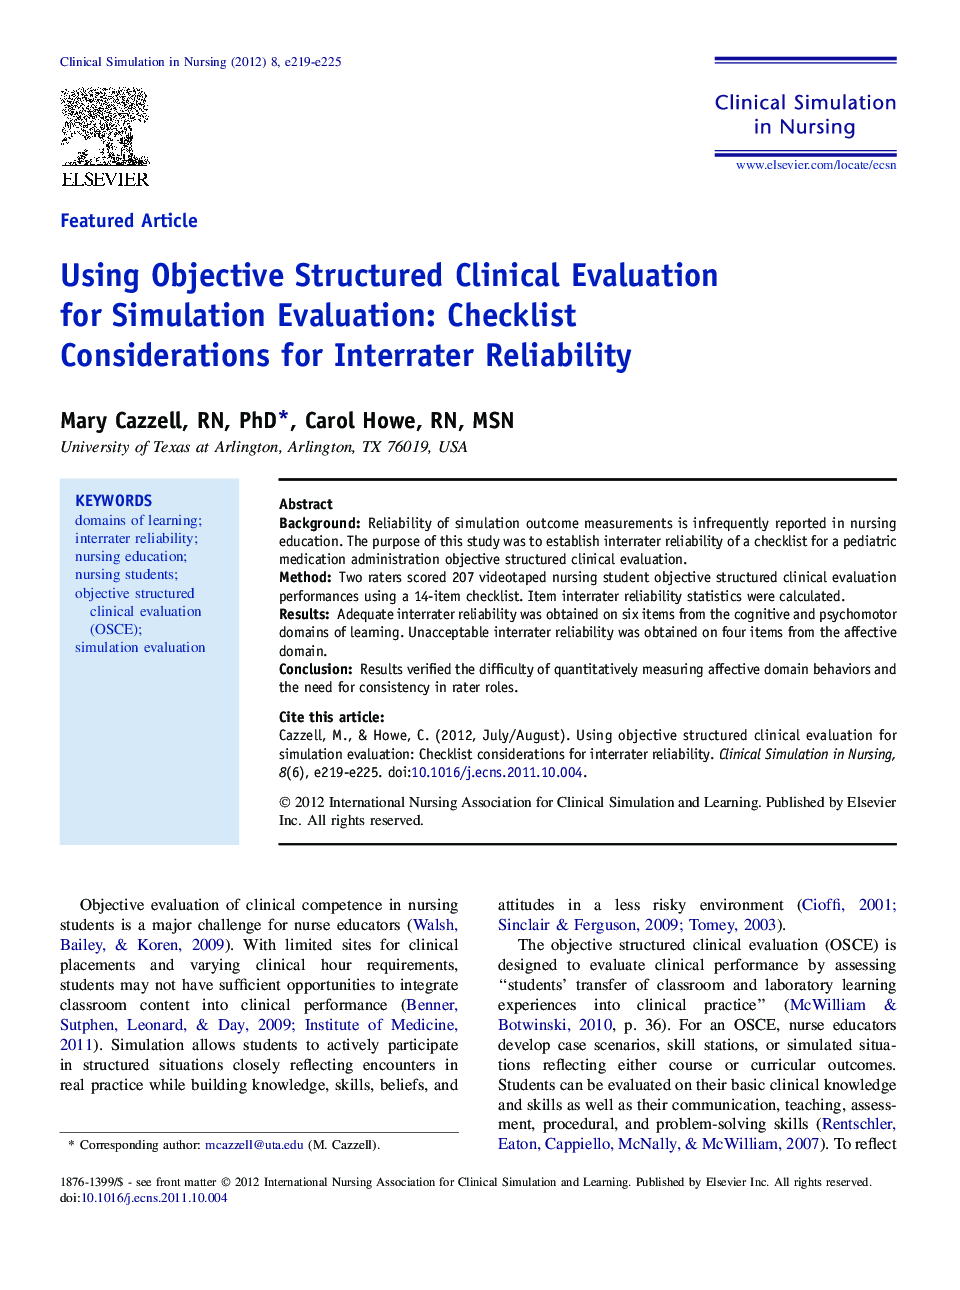 Using Objective Structured Clinical Evaluation for Simulation Evaluation: Checklist Considerations for Interrater Reliability